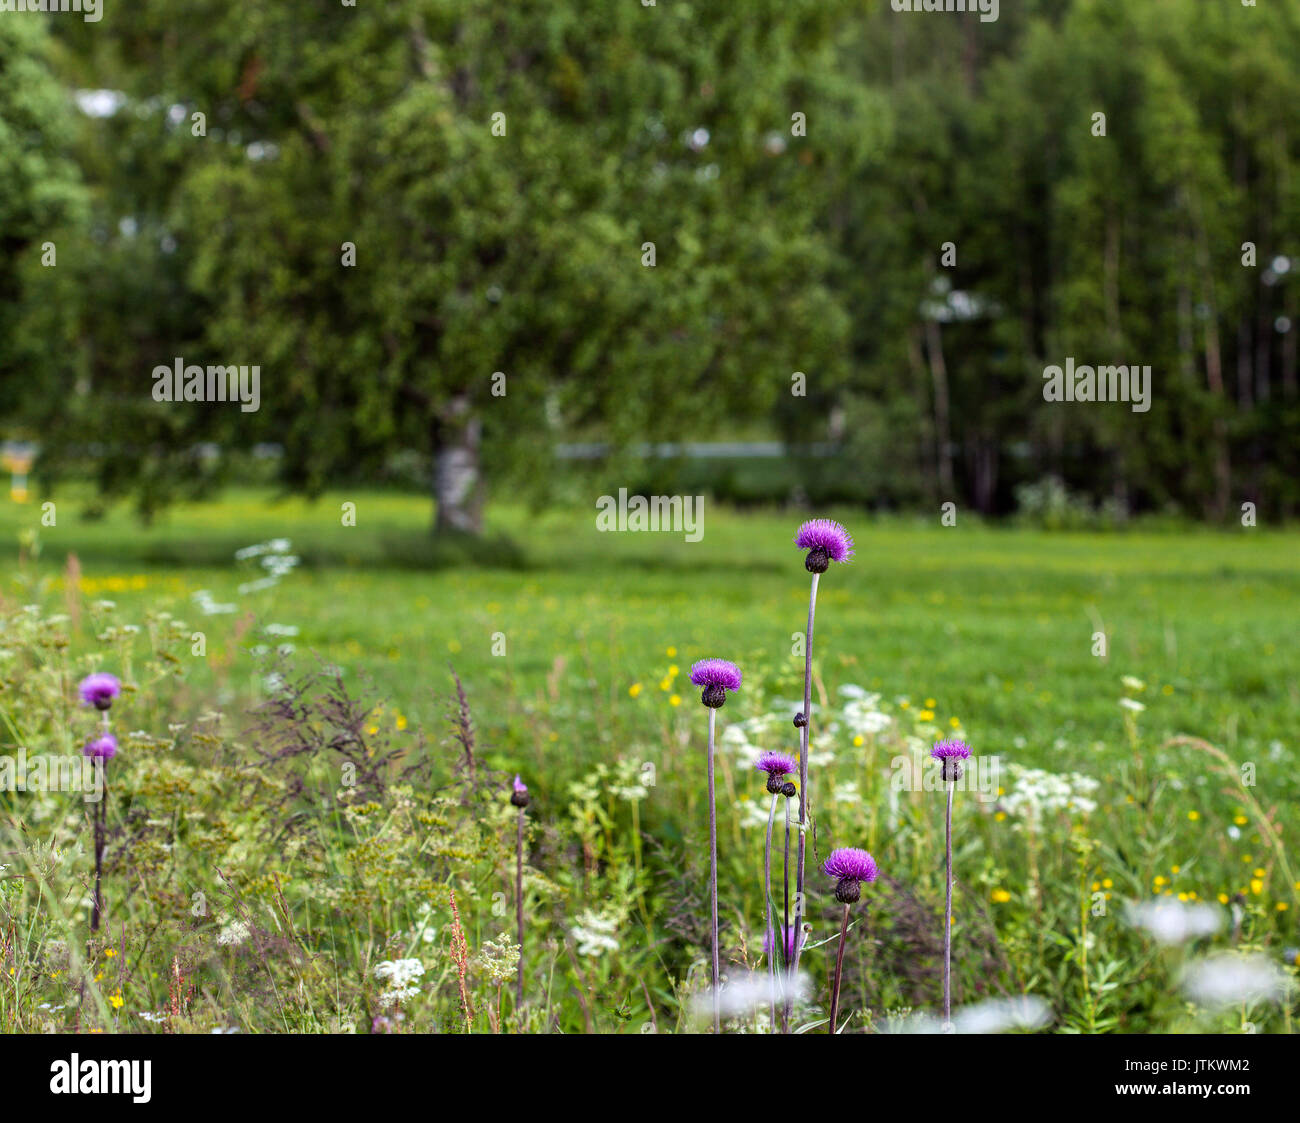 Some melancholy thistles on a flower meadow. Trees in the background. Stock Photo